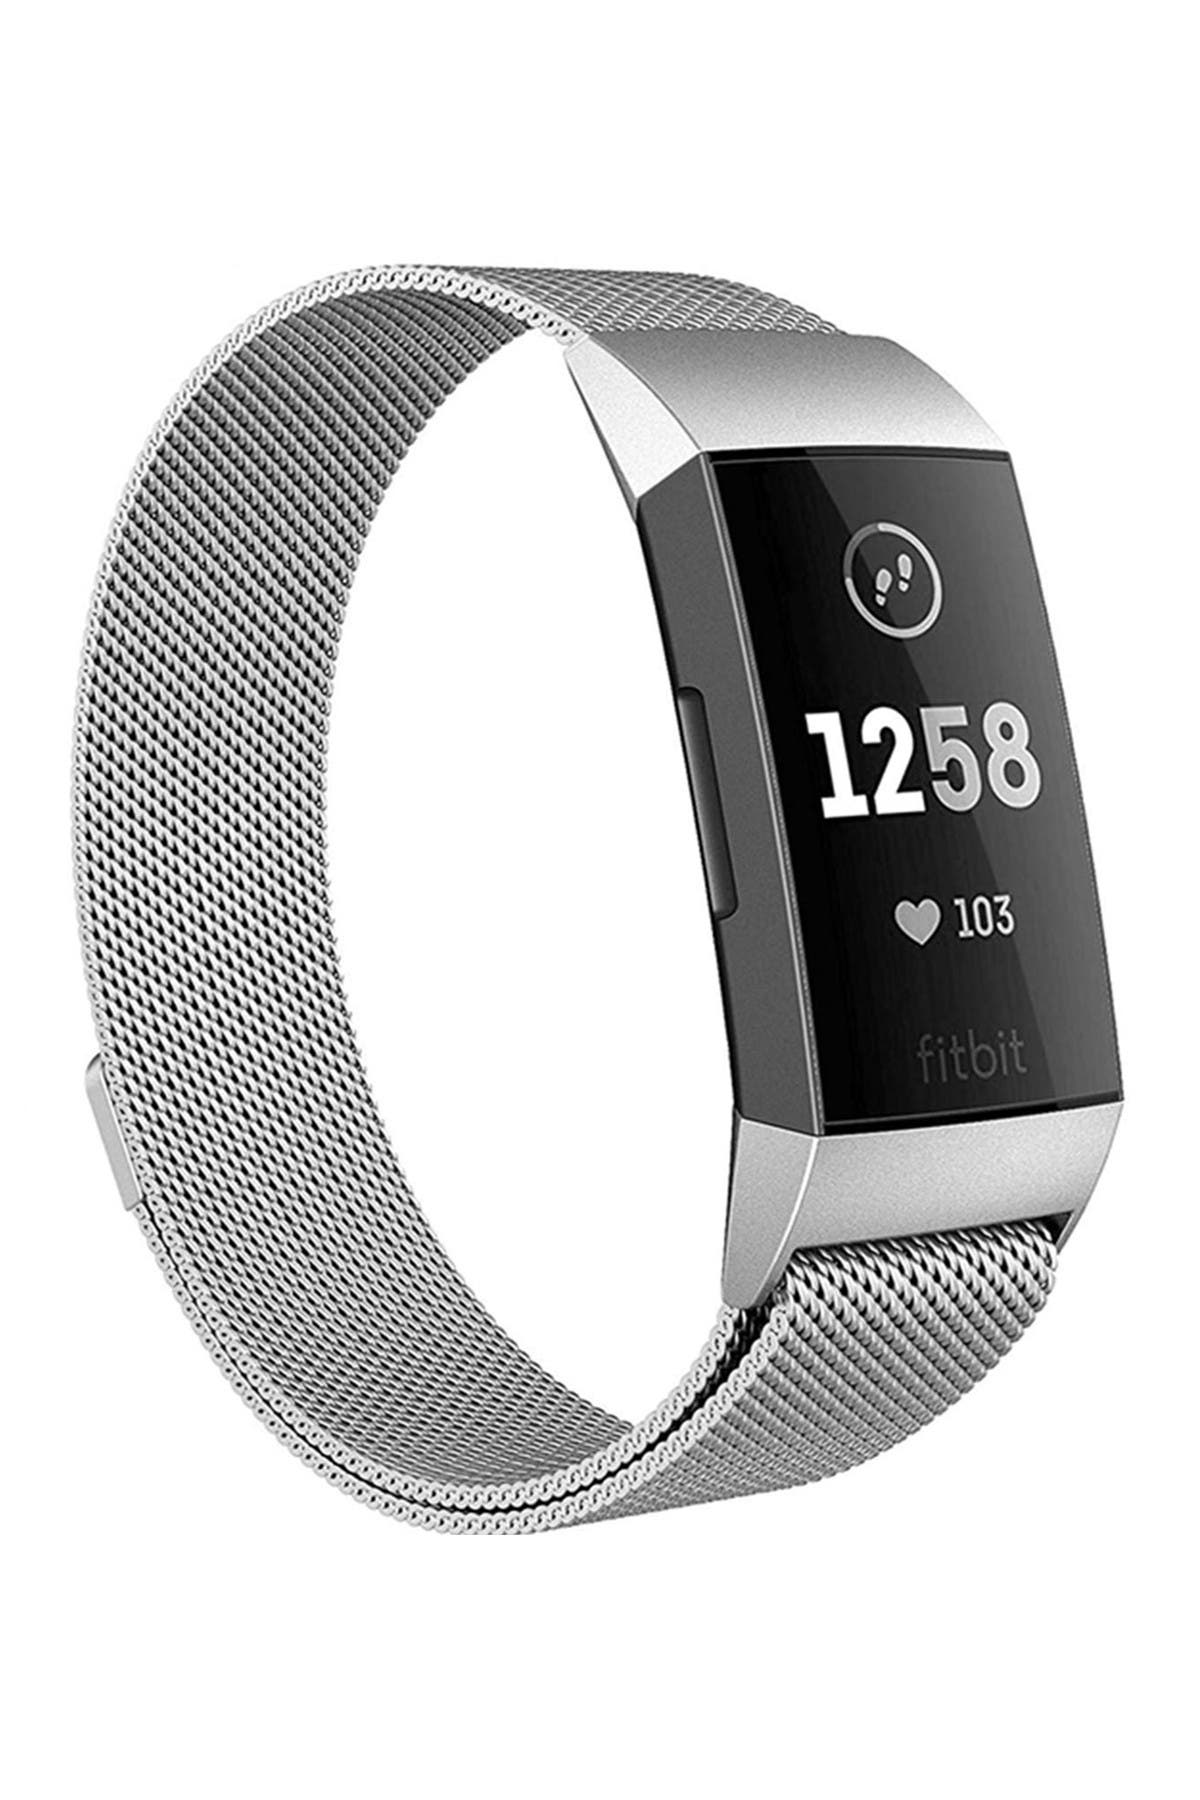 fitbit 3 charge band